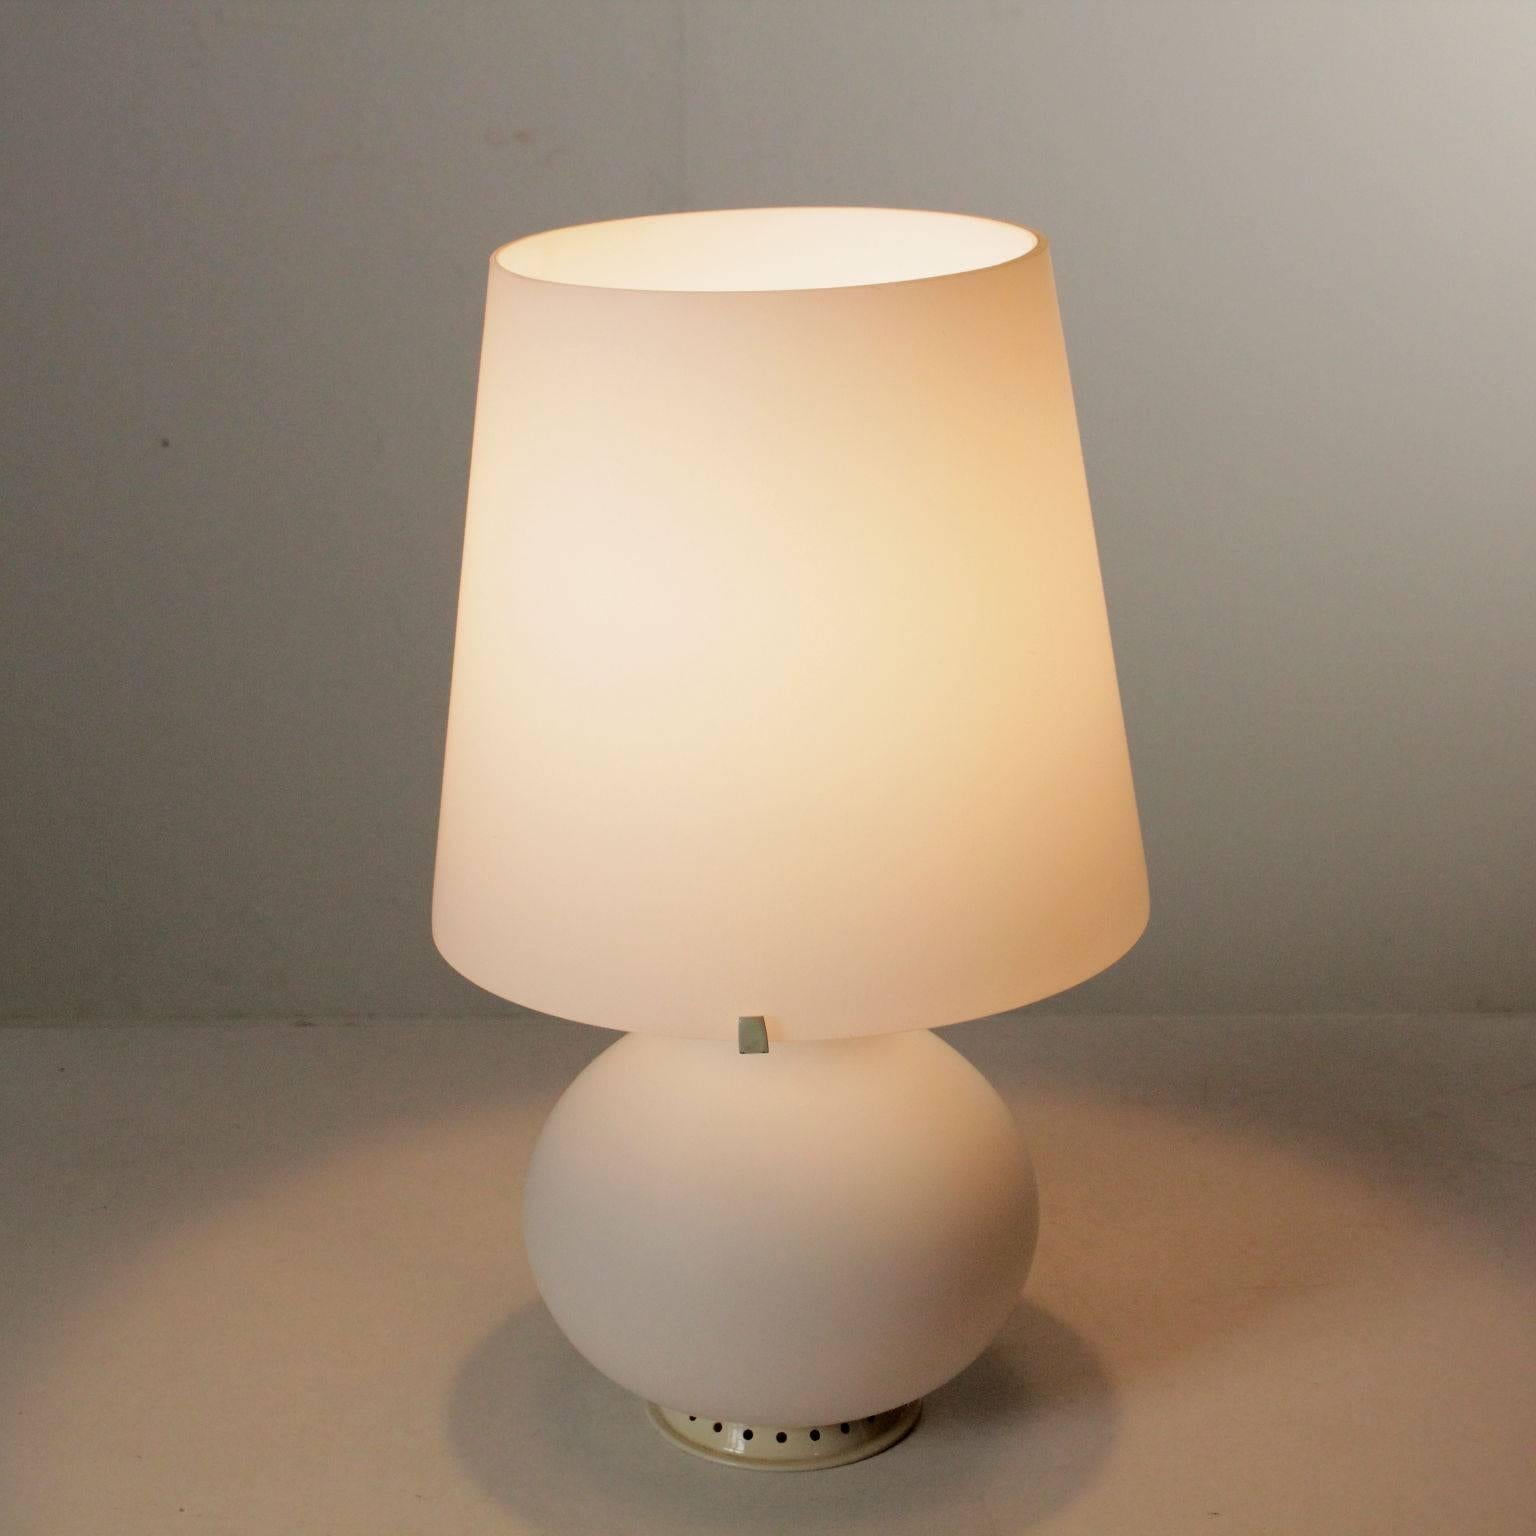 Table lamp designed by Max Ingrand (1908-1969) for FontanaArte. Opaline glass. Model: 1853. Manufactured in Milan, Italy, 1960s-1970s.